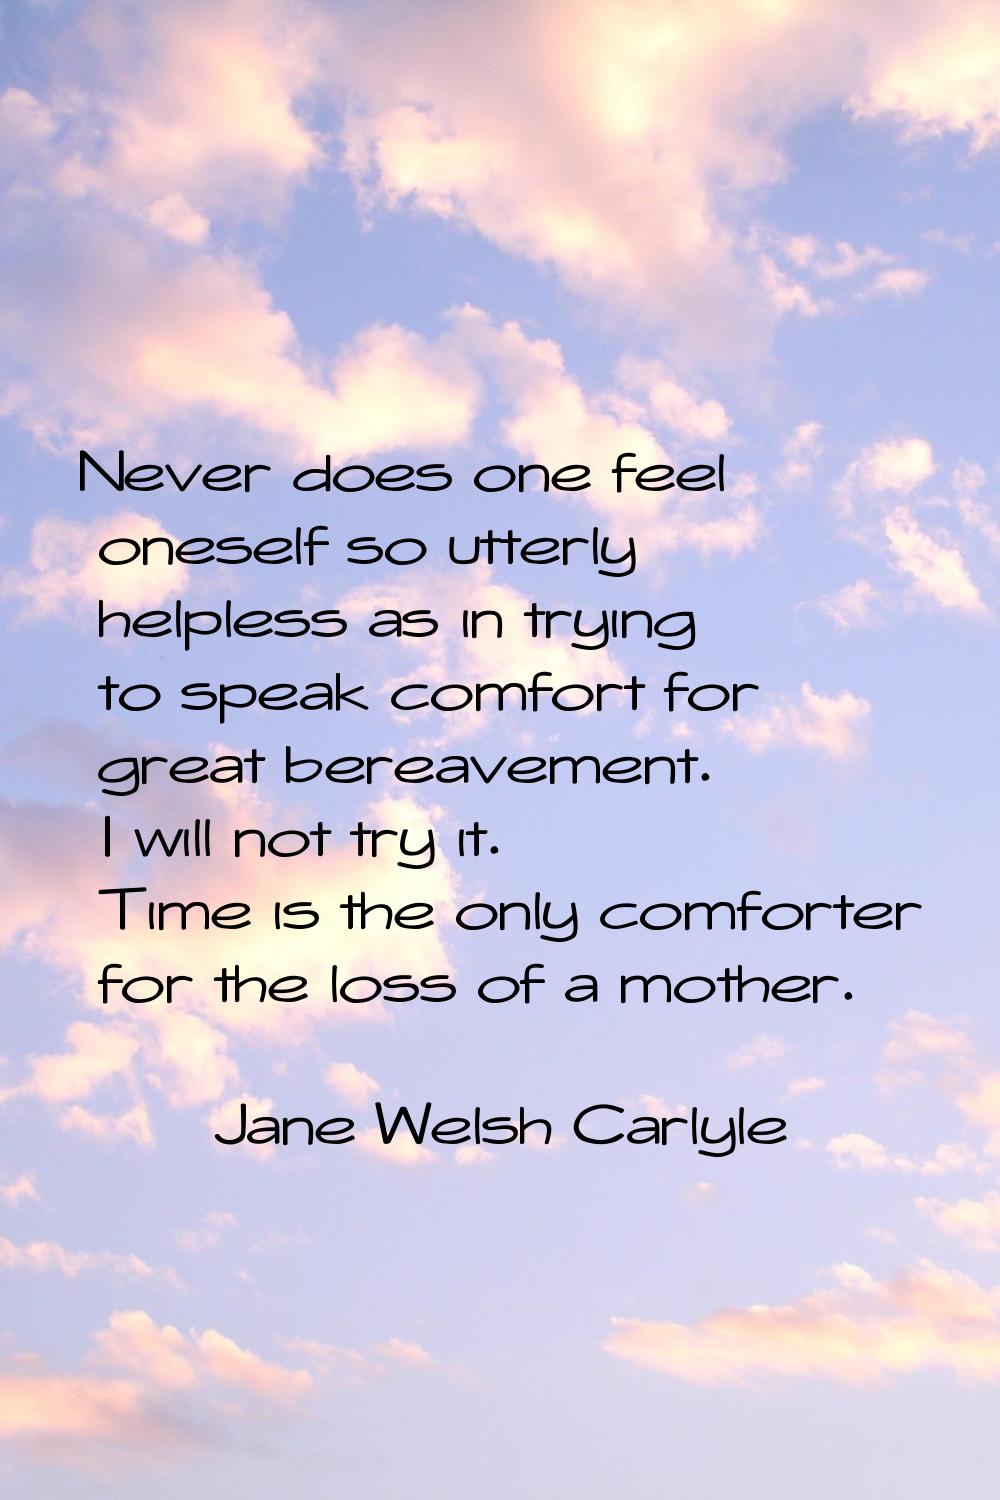 Never does one feel oneself so utterly helpless as in trying to speak comfort for great bereavement